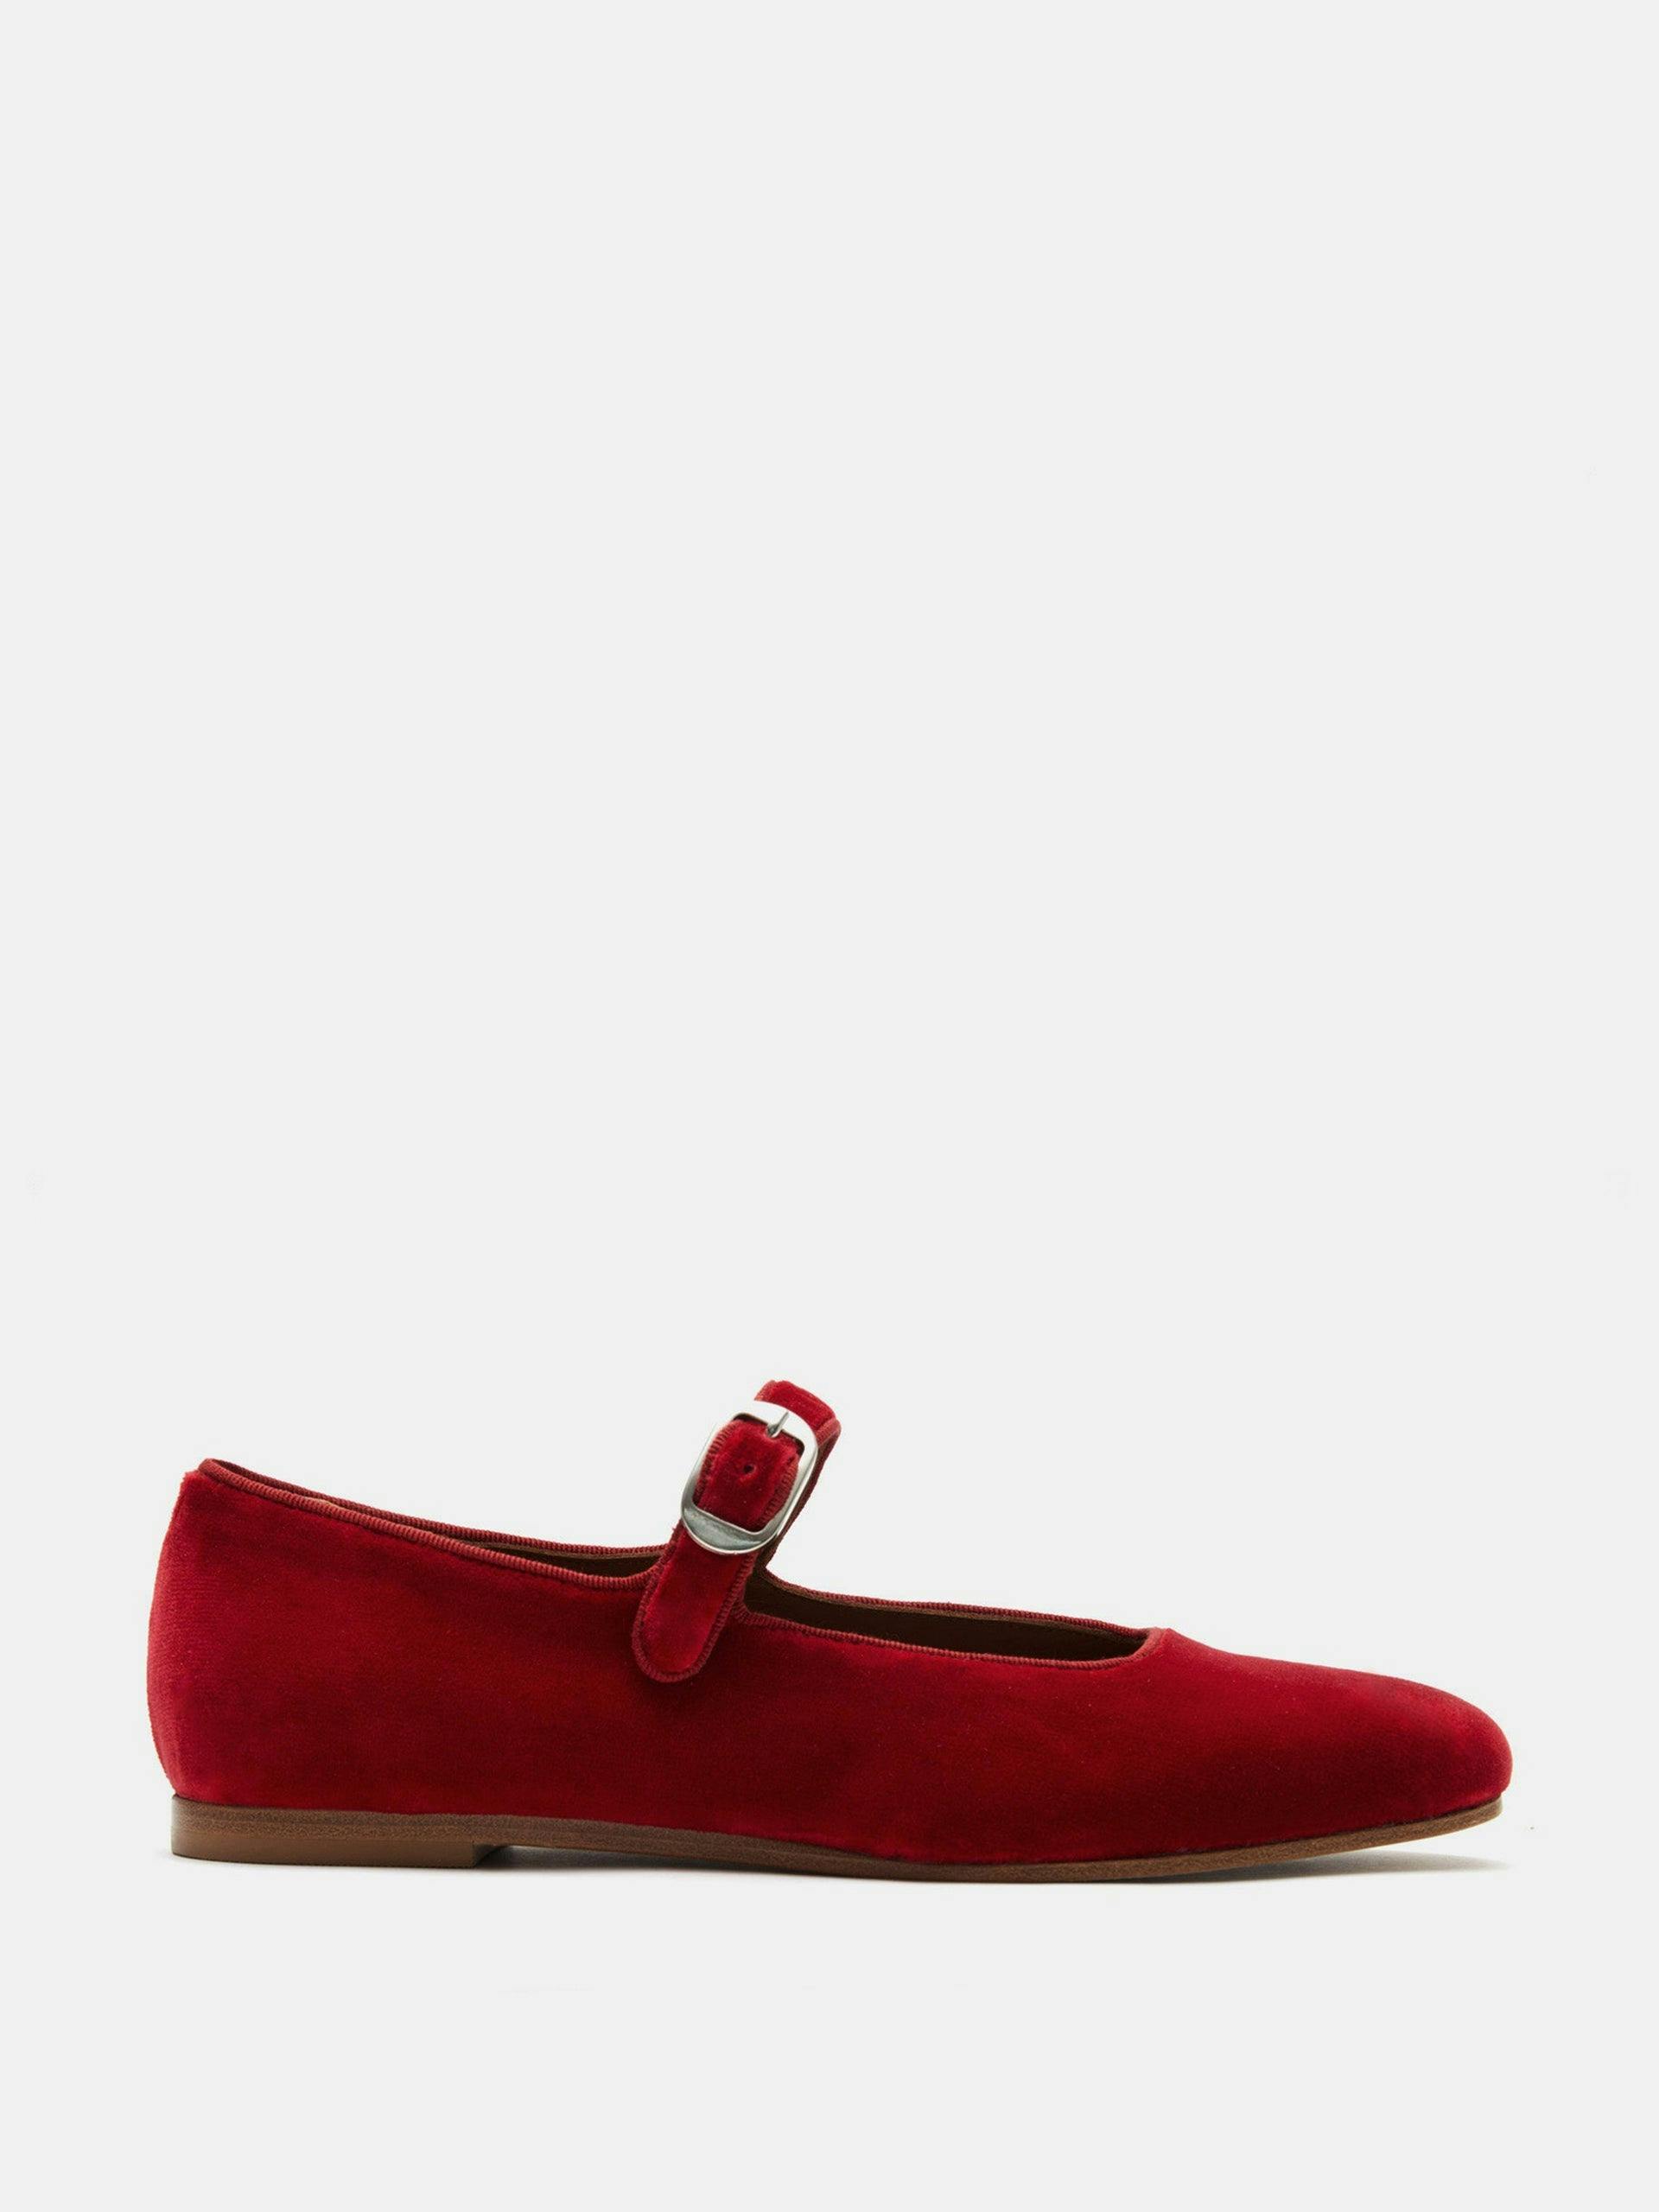 Cloth Collective red velvet Mary Jane flats